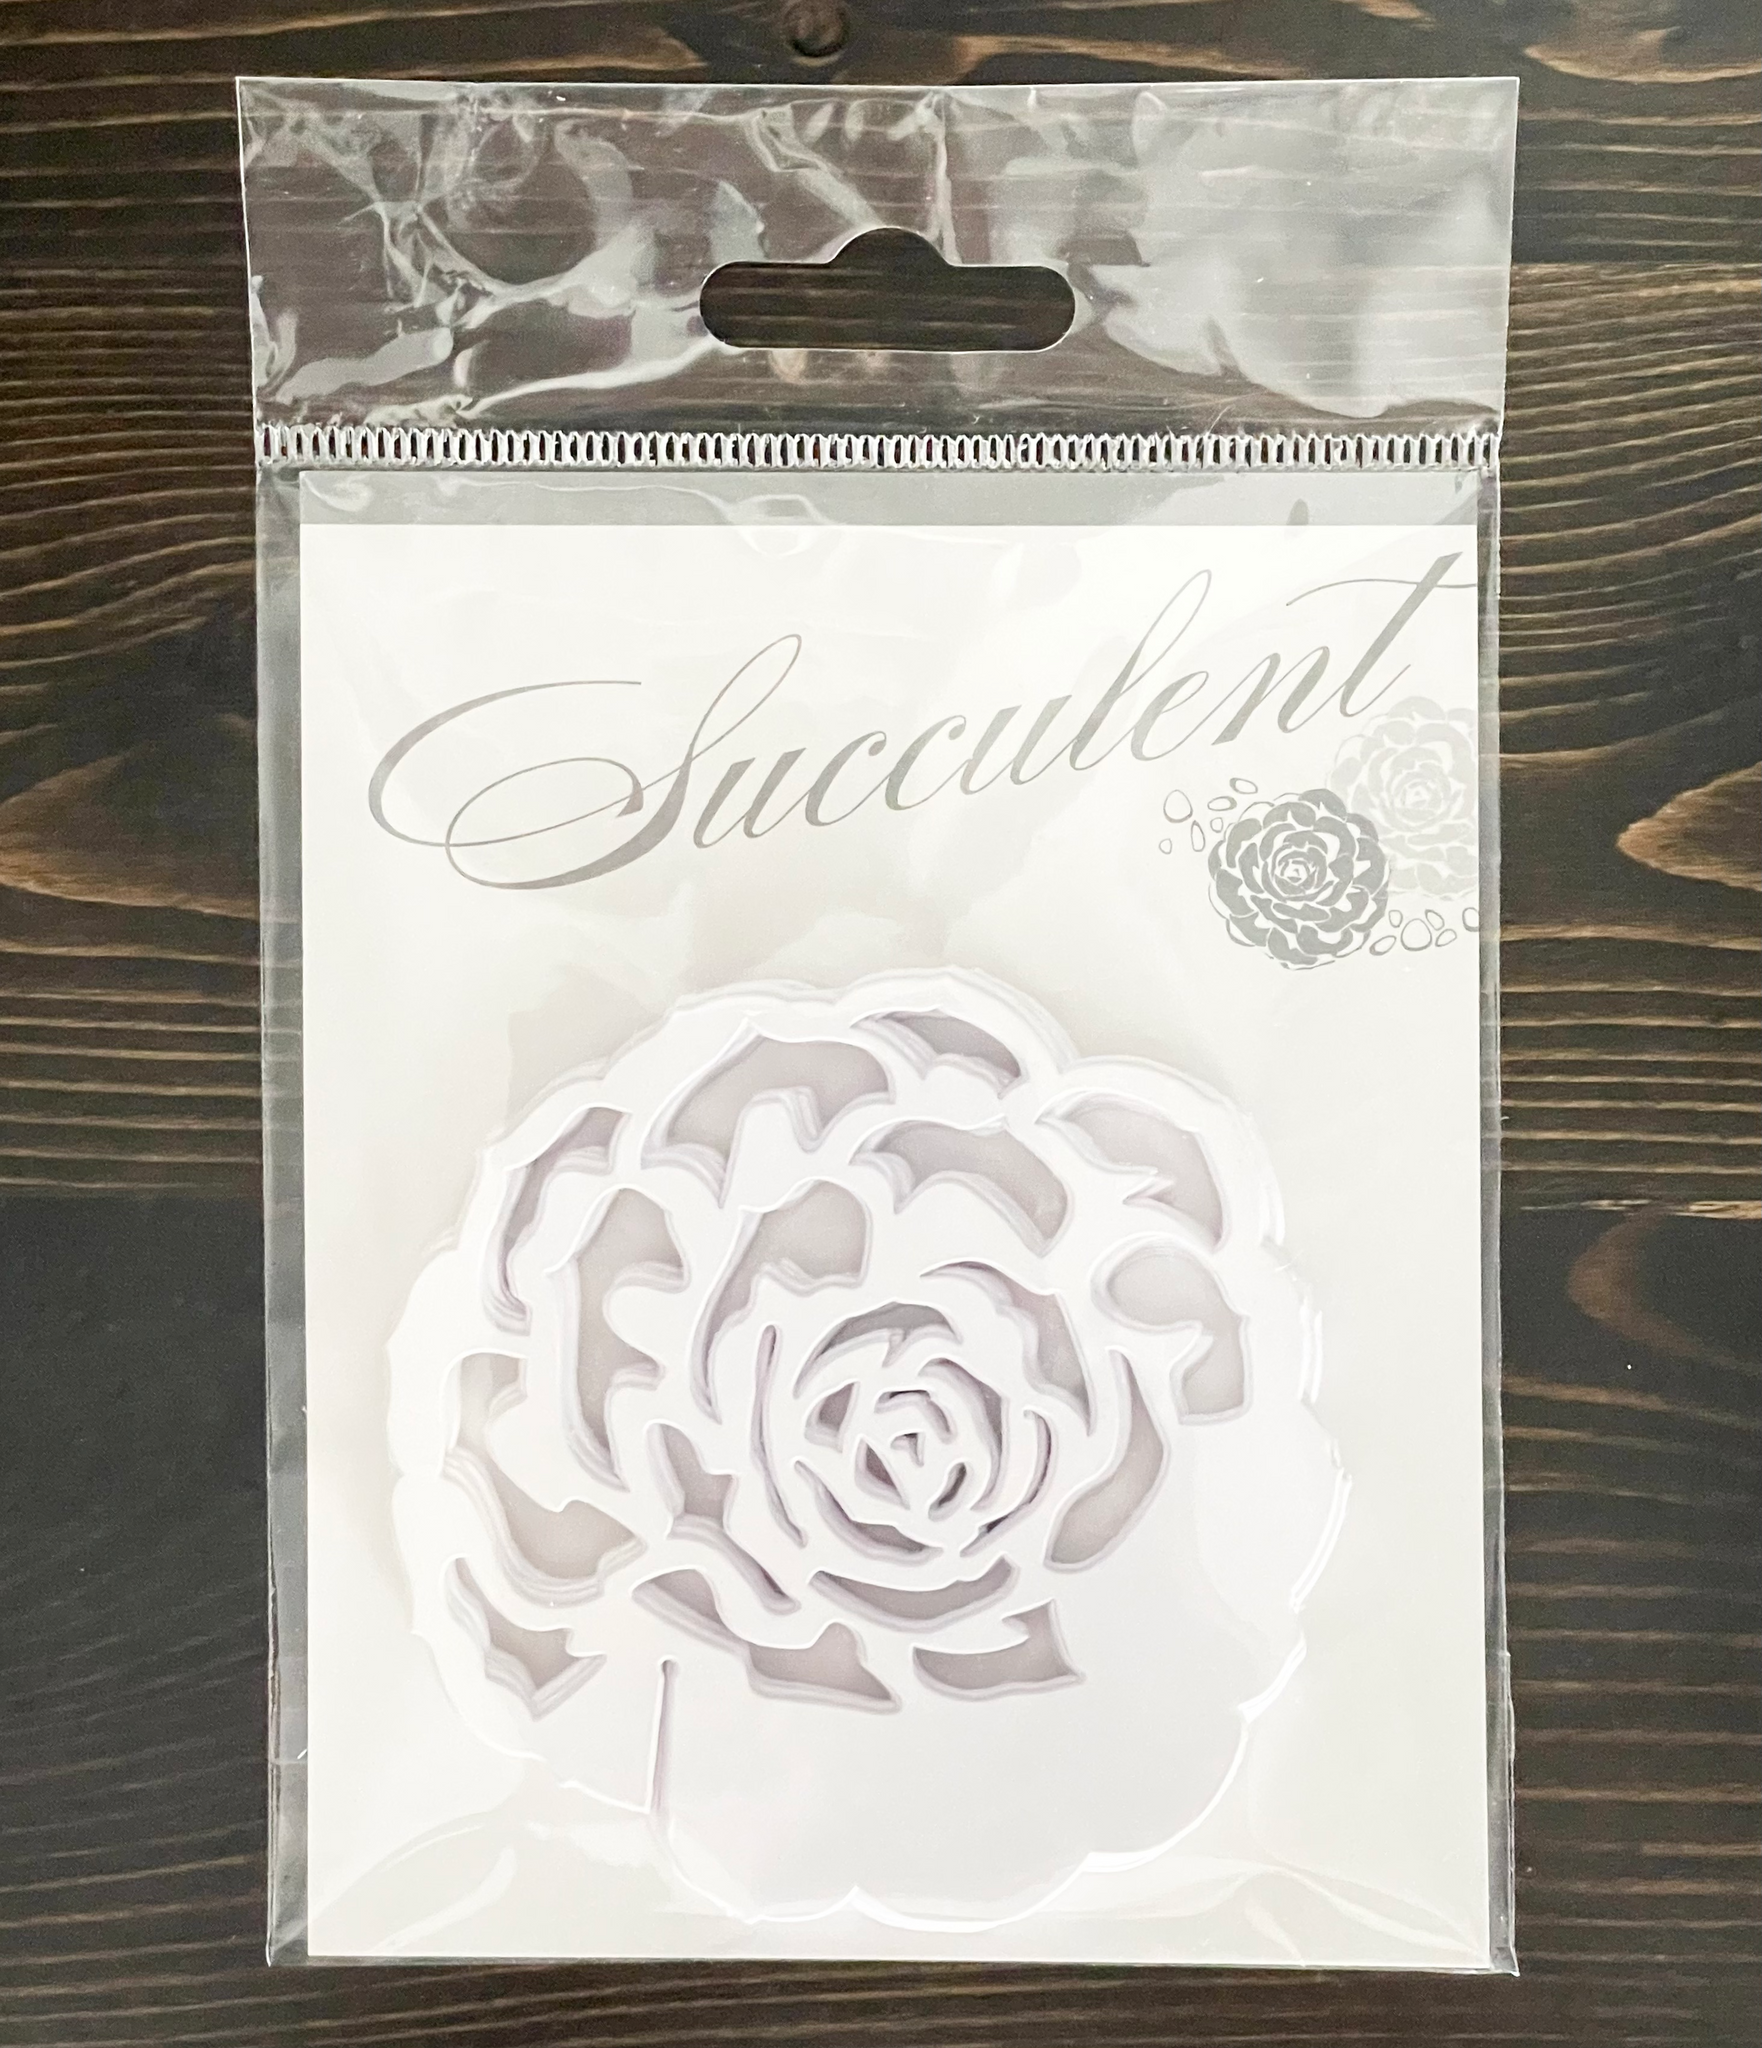 Laser Expressions Succulent Die Cut Place Card / Drink Marker - White